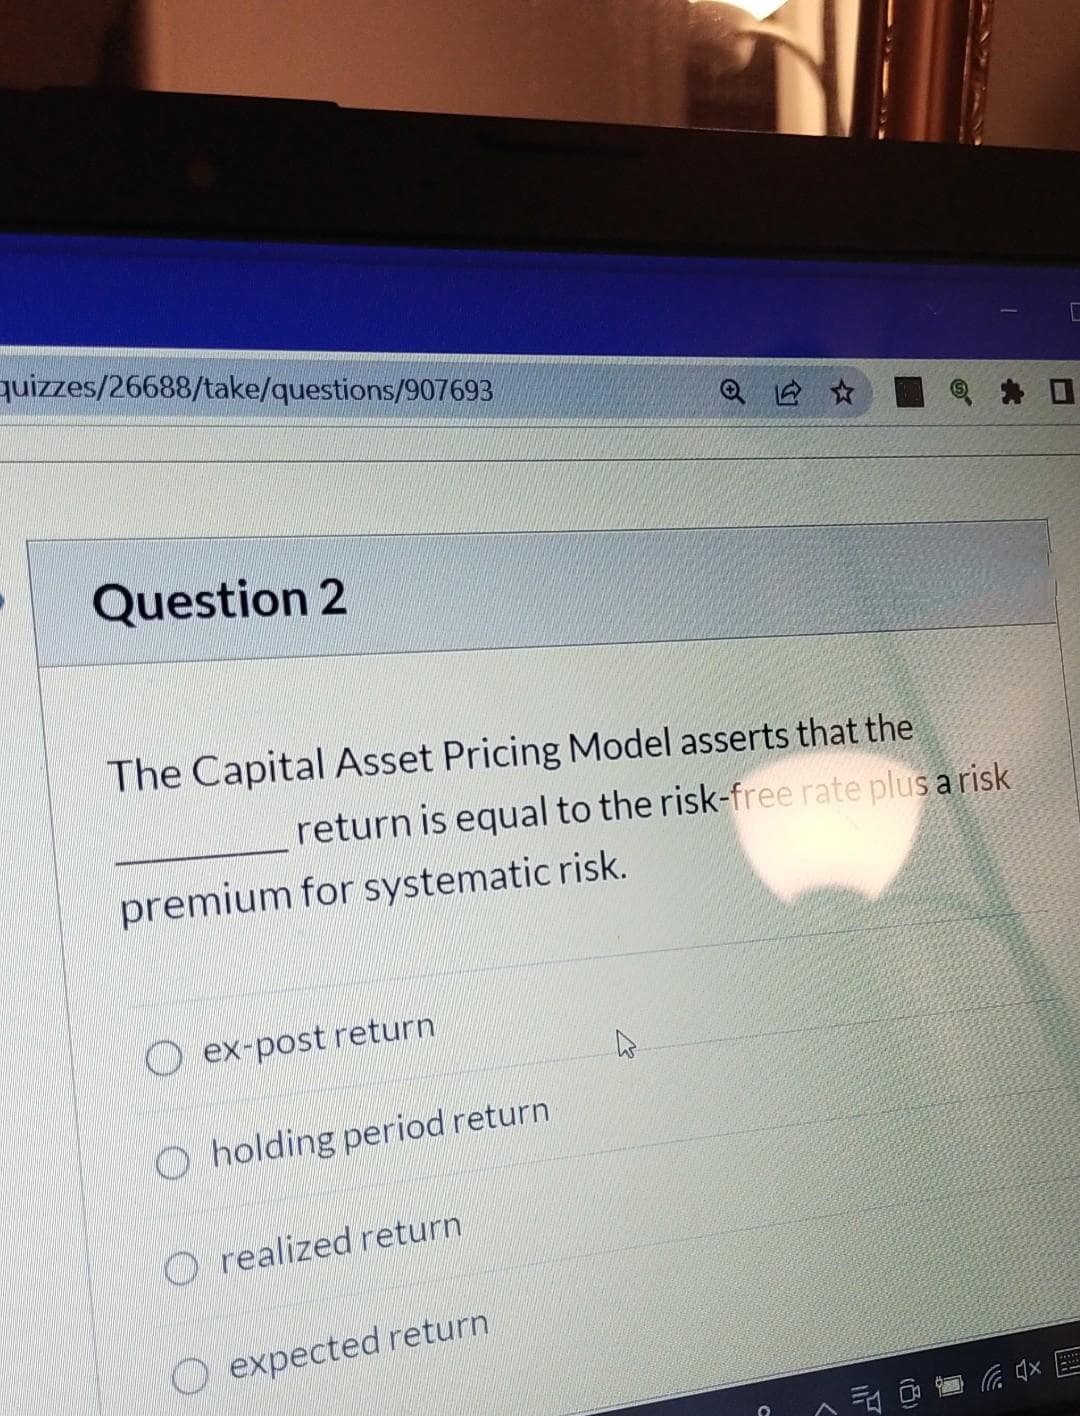 quizzes/26688/take/questions/907693
Question 2
The Capital Asset Pricing Model asserts that the
return is equal to the risk-free rate plus a risk
premium for systematic risk.
ex-post return
Oholding period return
Orealized return
expected return
C
(4x
[